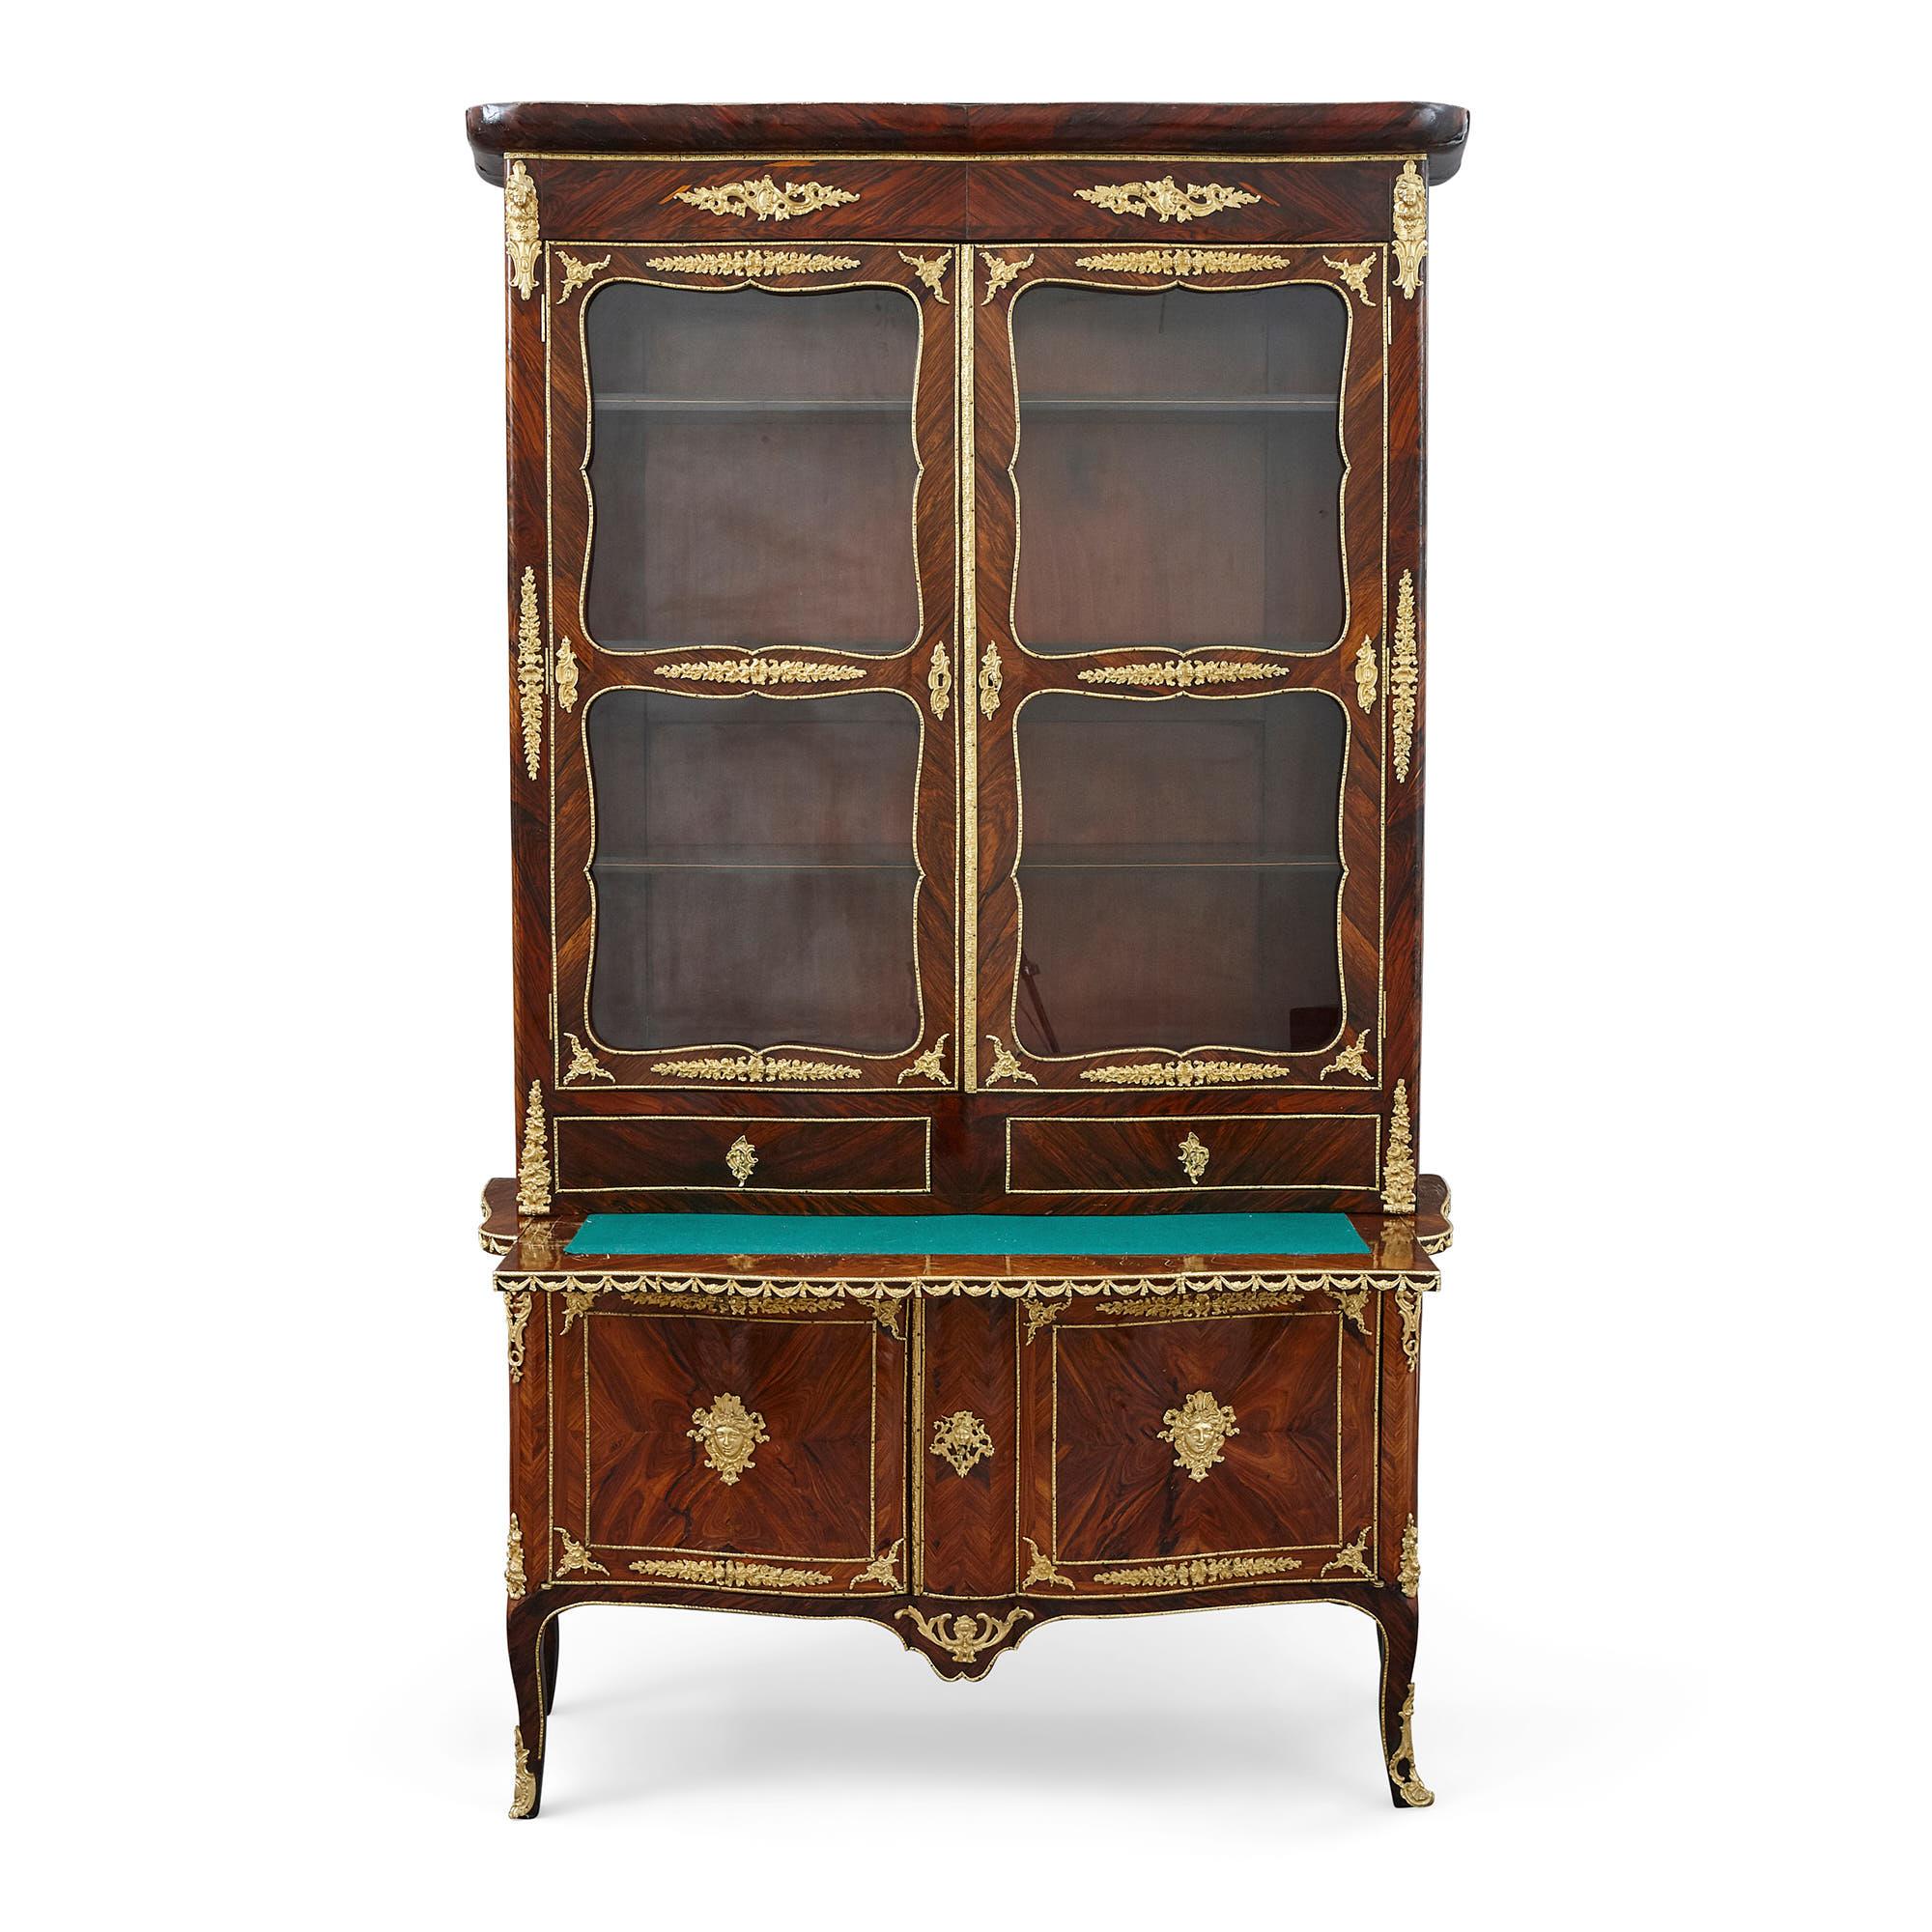 Napoleon III Second Empire Period Gilt Bronze and Kingwood Display Cabinet For Sale